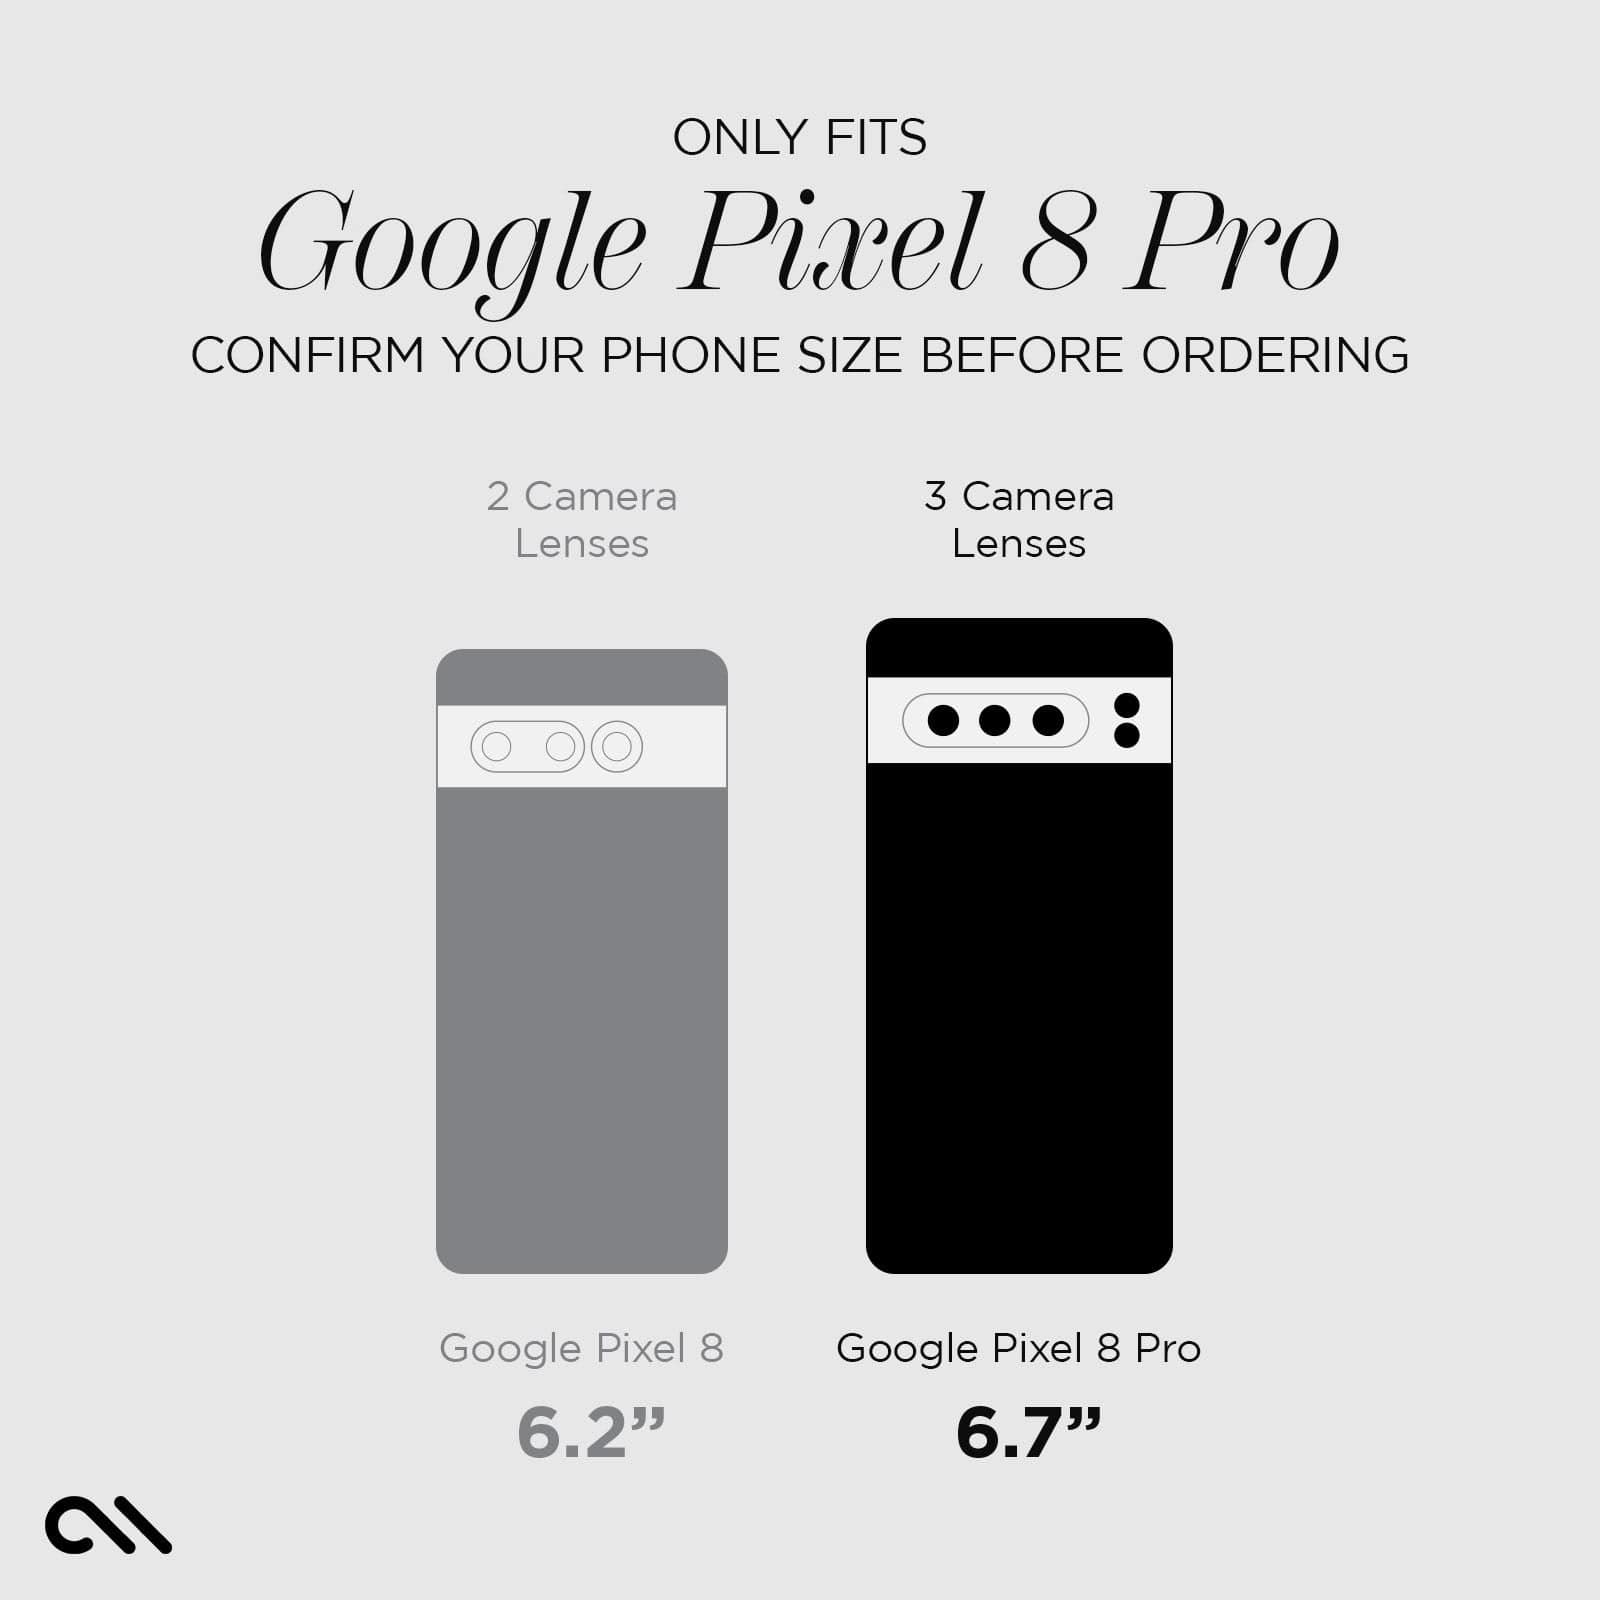 GOOGL EPIXEL 8 PRO. CONFIRM YOUR PHONE SIZE BEFORE ORDERING